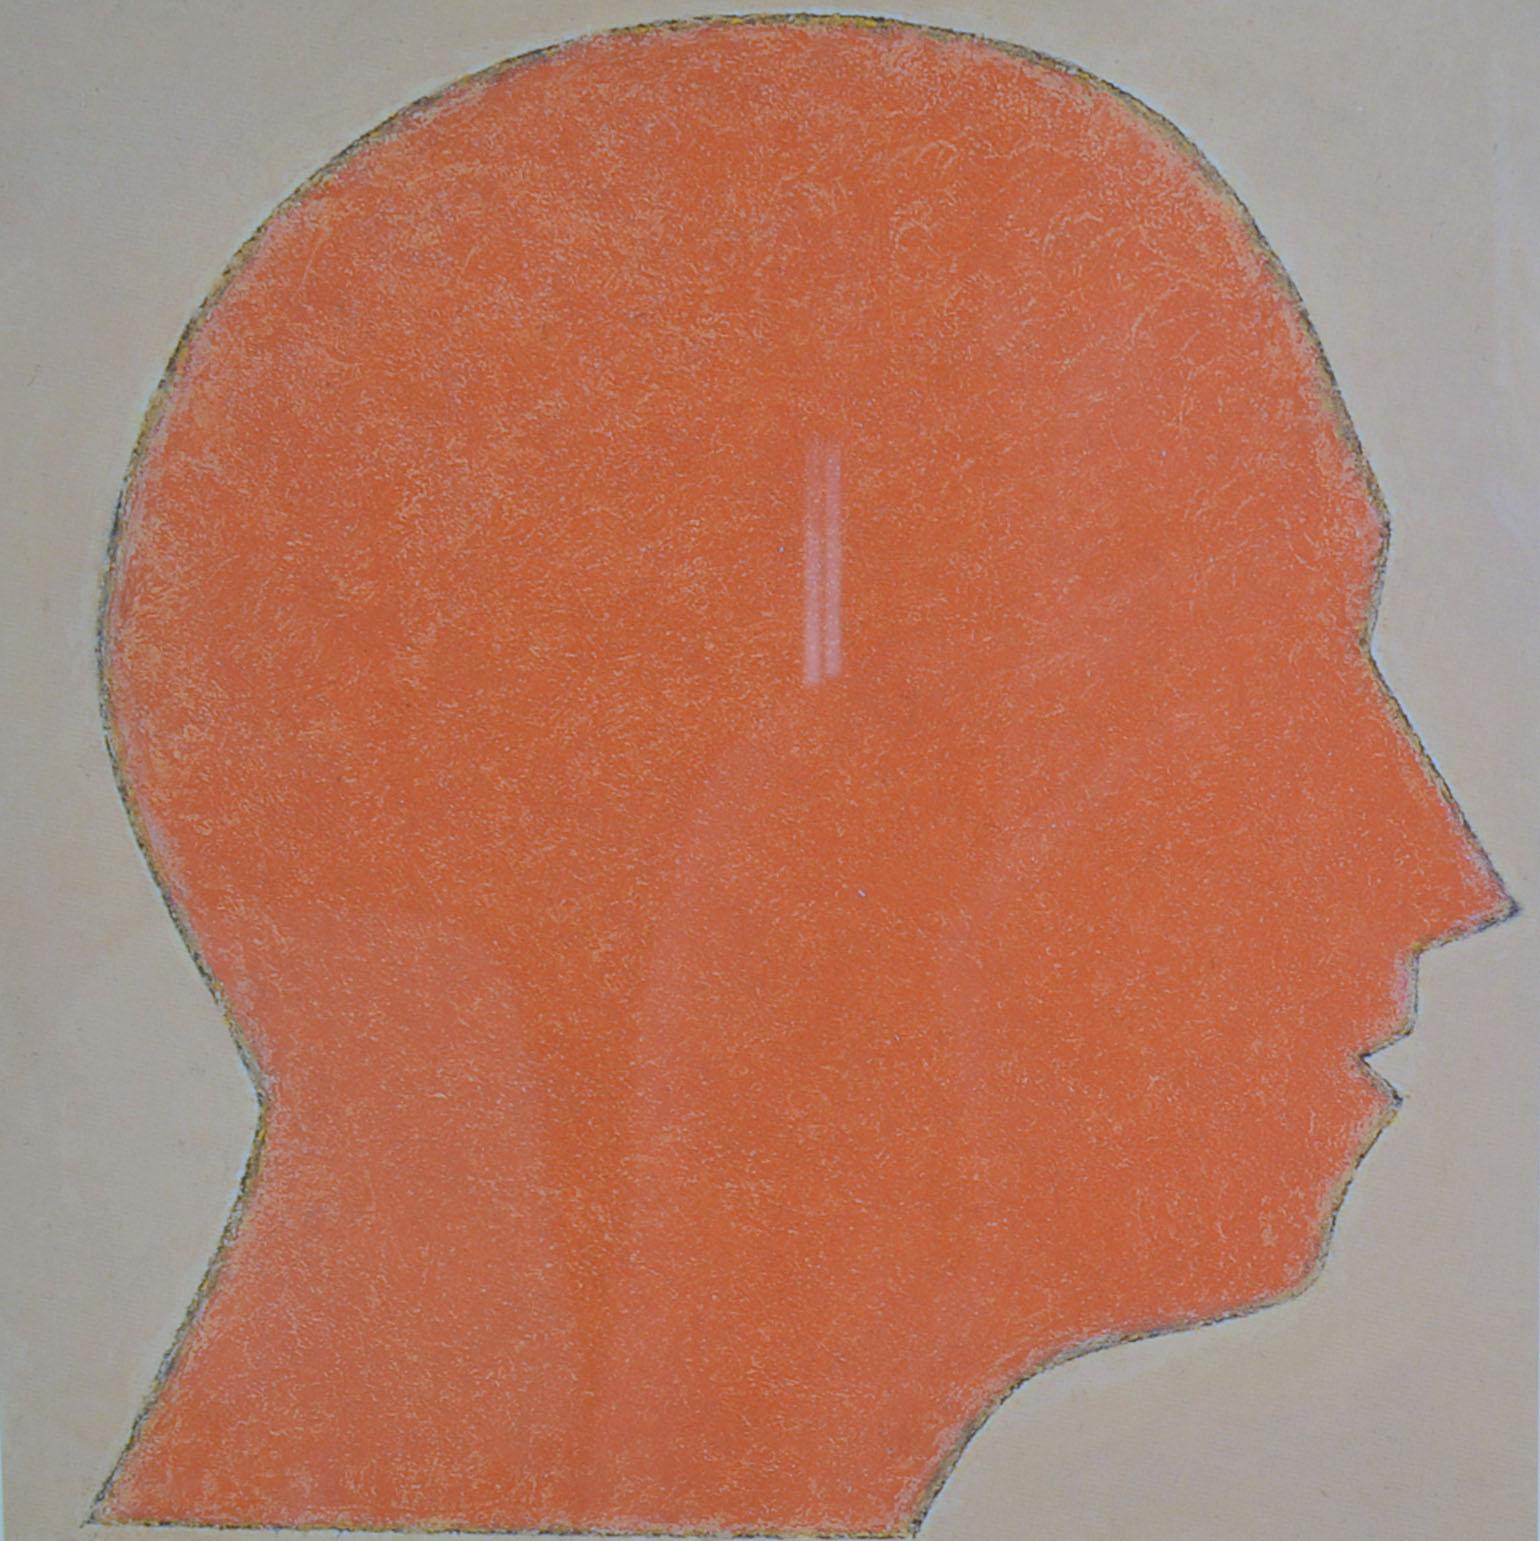 Lithograph of faces in silhouette by Beate Selzer, Germany 1990's. In this print the headsars reduced to the bear minimum and stylized to head sculptures each with its own color becoming a play of repeating patterns and the spaces in between. They